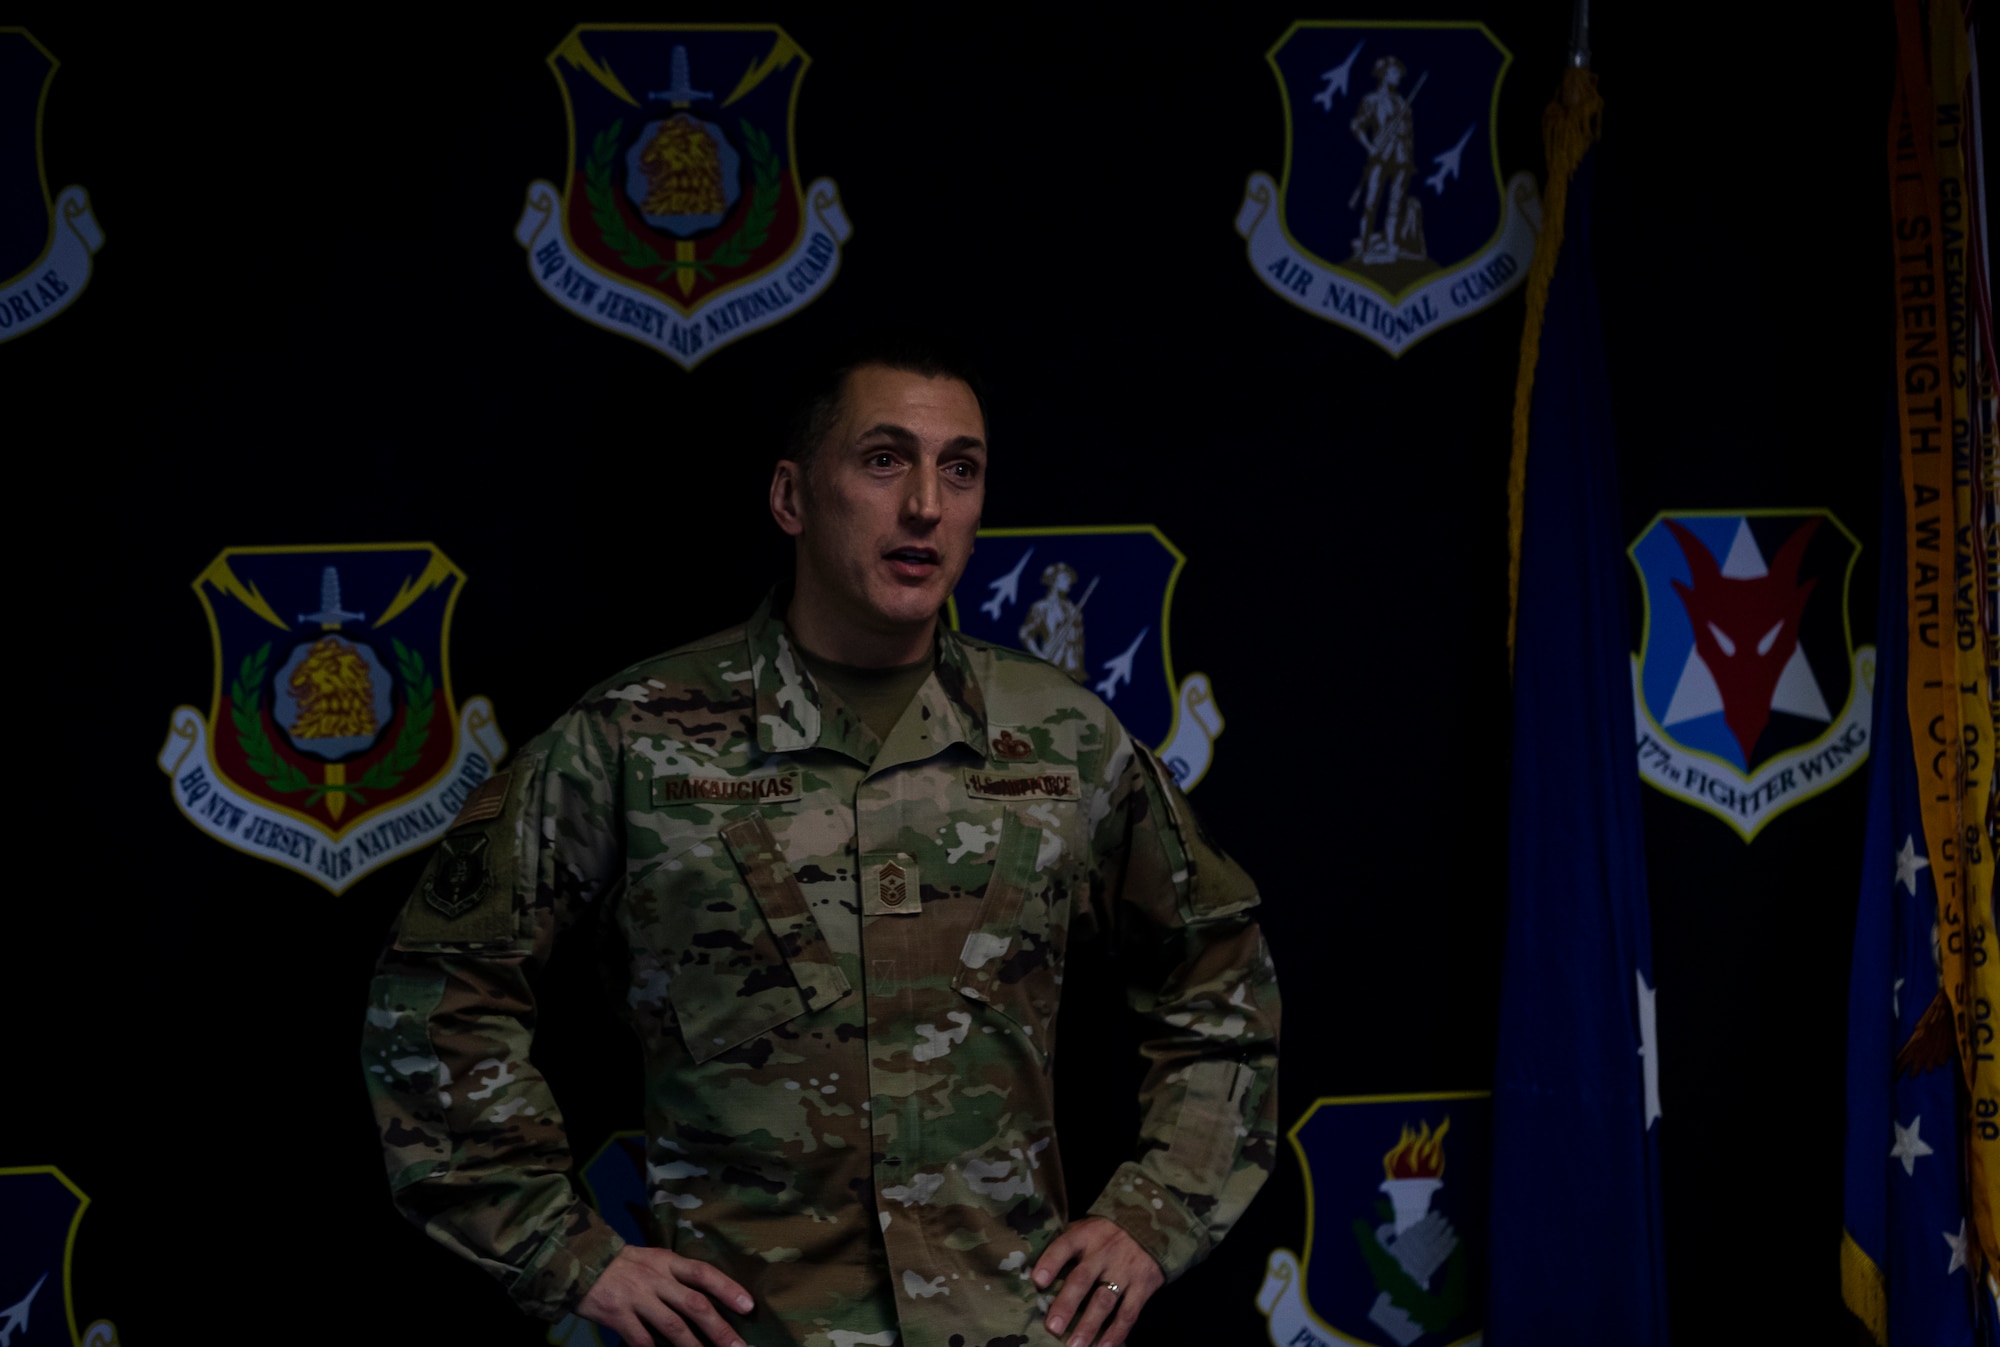 New Jersey State Command Chief Master Sgt. Michael Rakauckas speaks to nearly 100 Airmen during the 2021 NJANG Enlisted Summit from Joint Force Headquarter-Air, Joint Base McGuire-Dix-Lakehurst, N.J., Sept. 29, 2021.